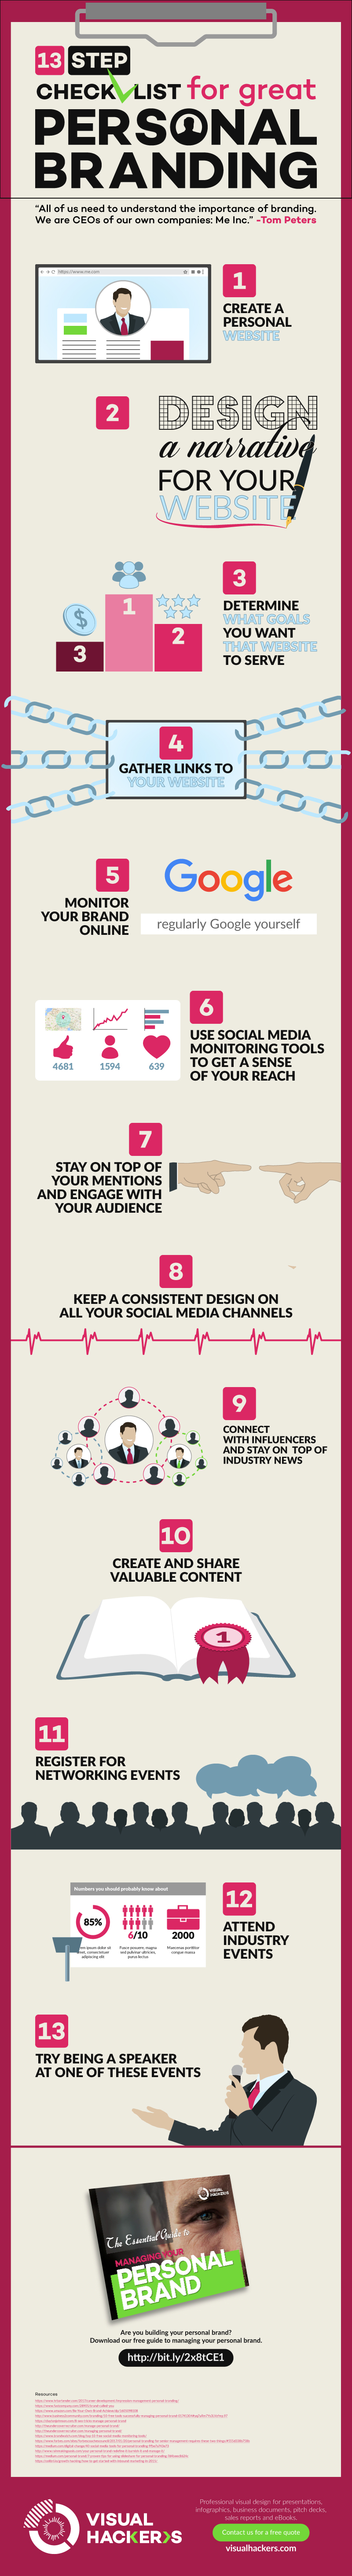 13-Step Checklist For Great Personal Branding